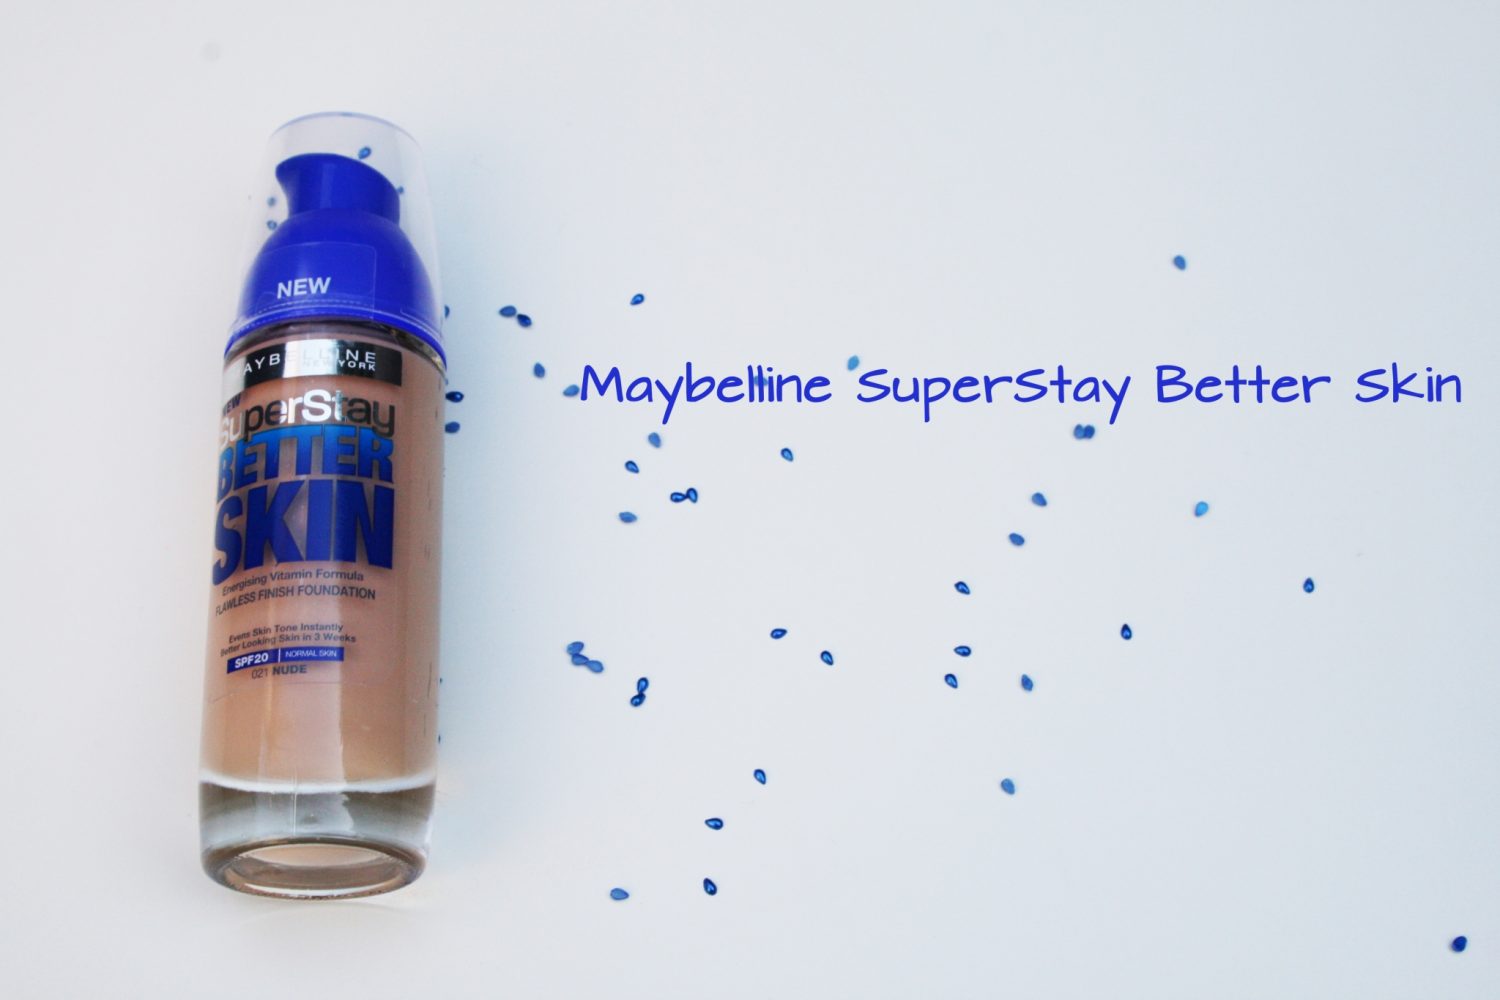 Review: Maybelline Superstay Better Skin